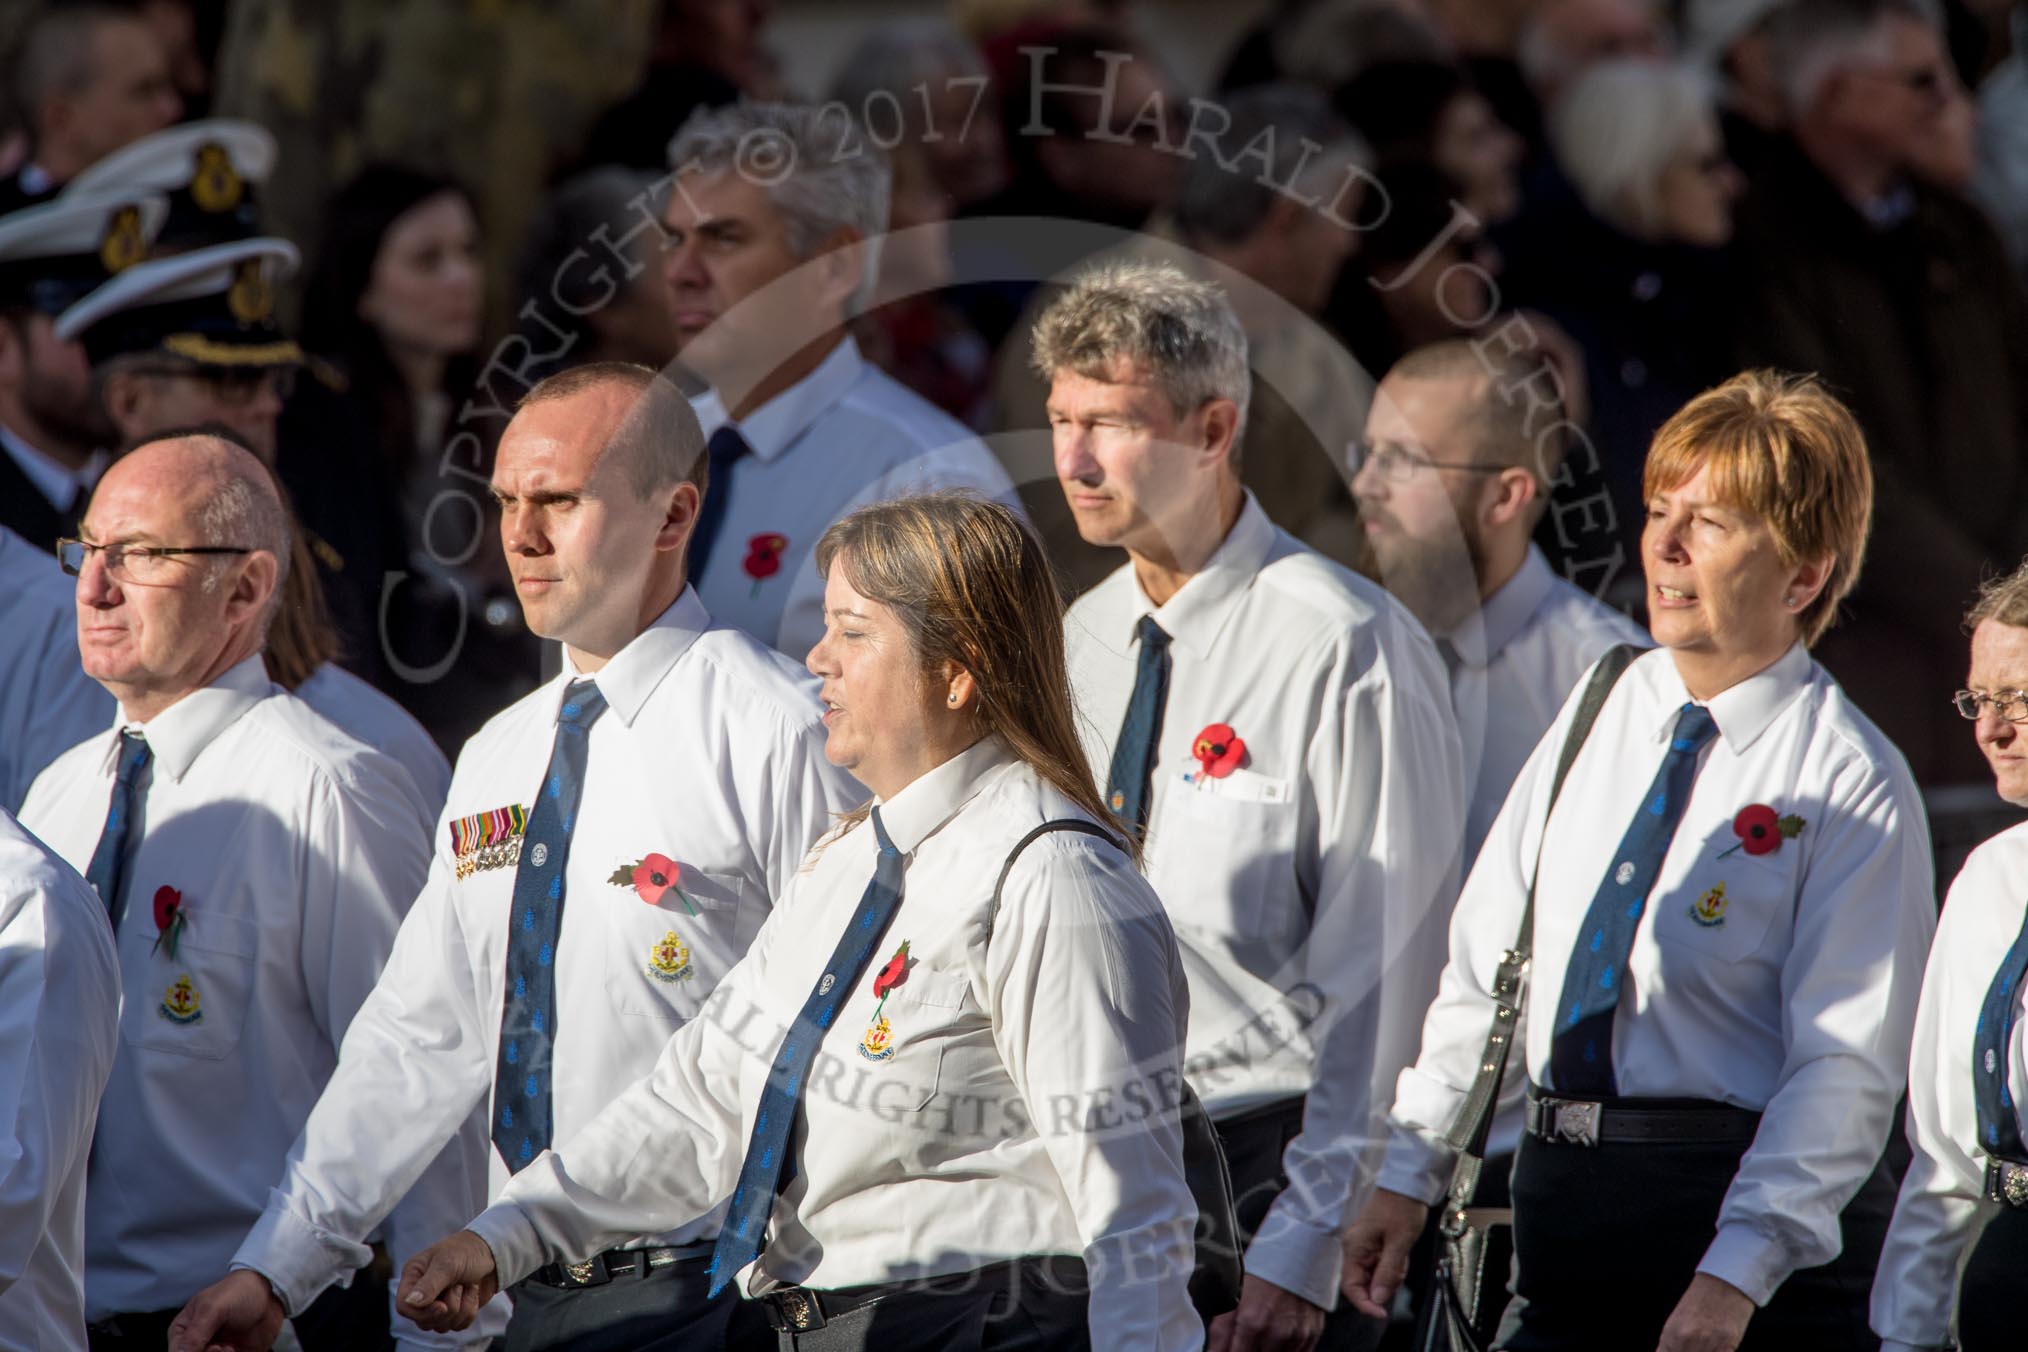 The Boys' Brigade (Group M39, 79 members) during the Royal British Legion March Past on Remembrance Sunday at the Cenotaph, Whitehall, Westminster, London, 11 November 2018, 12:30.